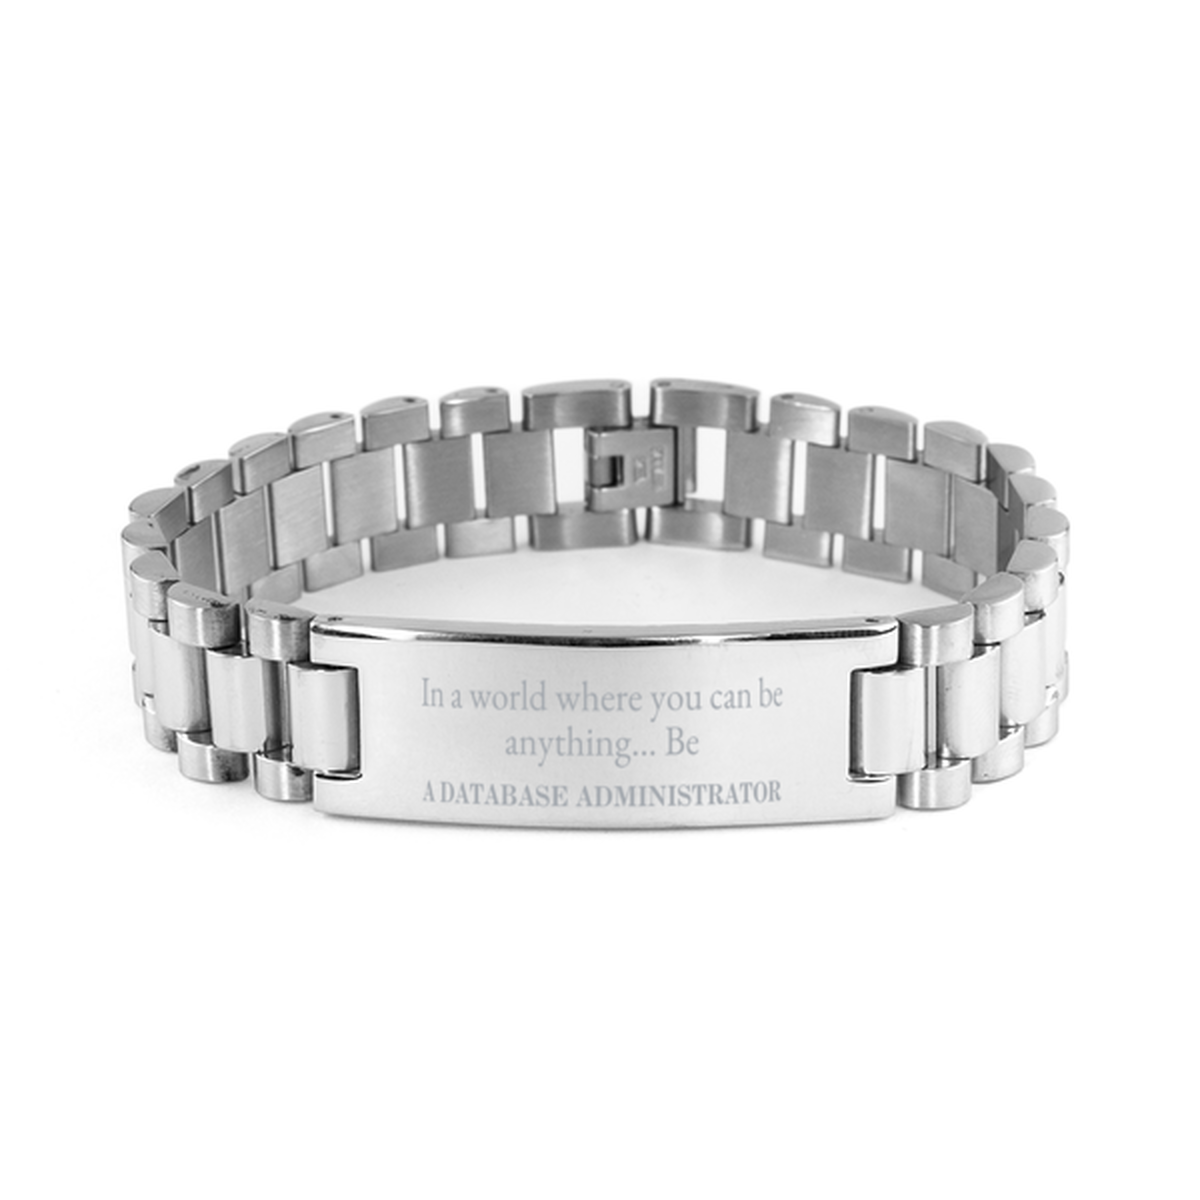 Gifts for Database Administrator, In a world where you can be anything, Appreciation Birthday Ladder Stainless Steel Bracelet for Men, Women, Friends, Coworkers